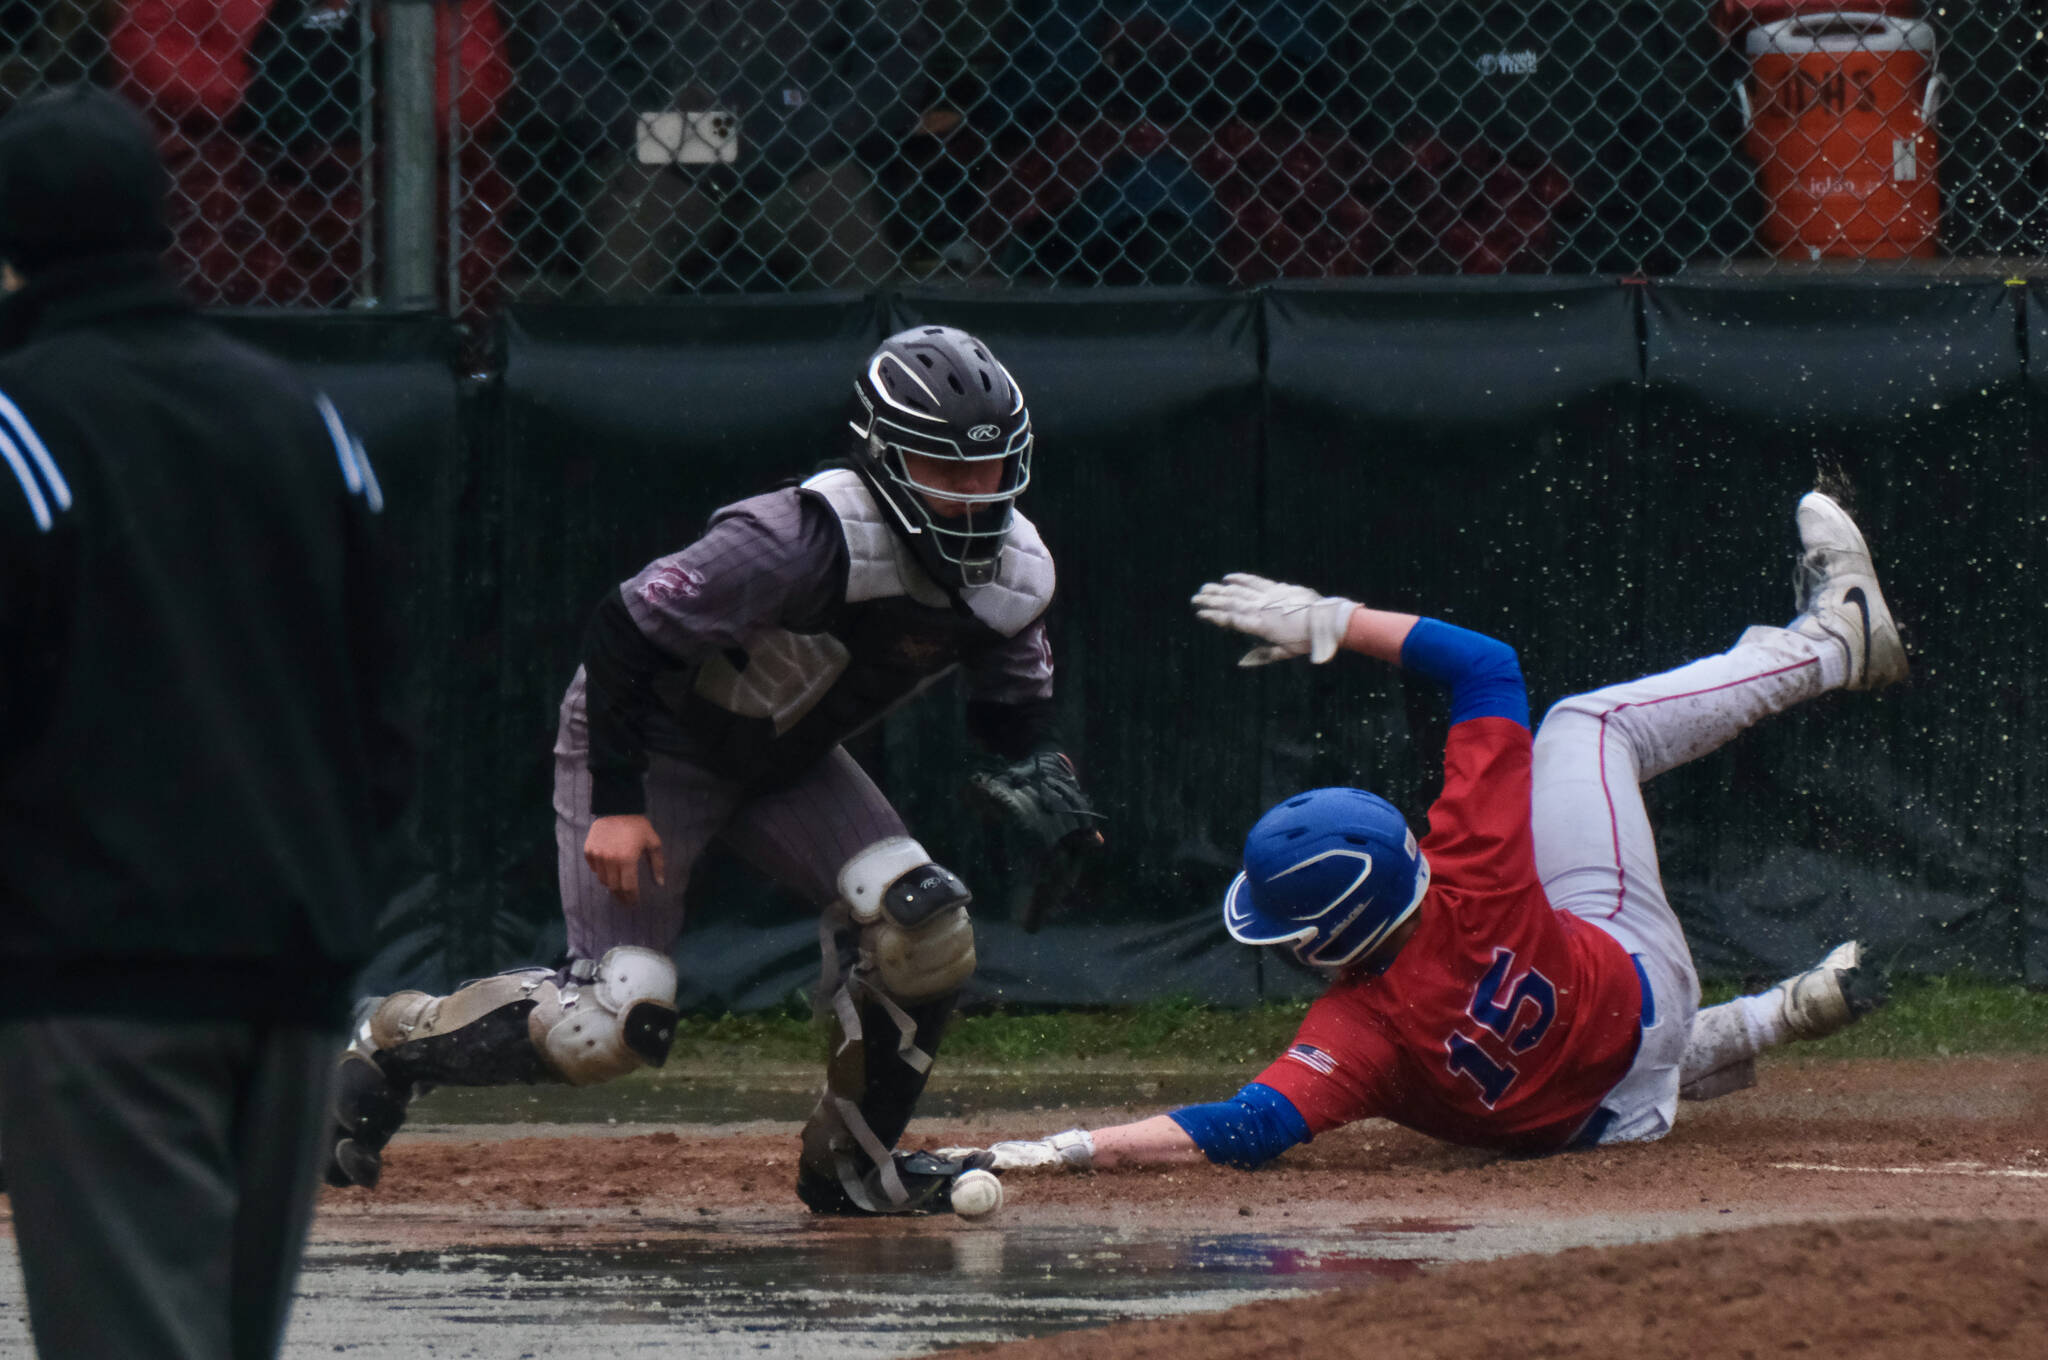 Photos by Klas Stolpe / Juneau Empire
Sitka junior Grady Smith slides safely into home plate during the Wolves 13-7 win over the Ketchikan Kings for the Region V Baseball Championship on Saturday at Adair Kennedy Field.